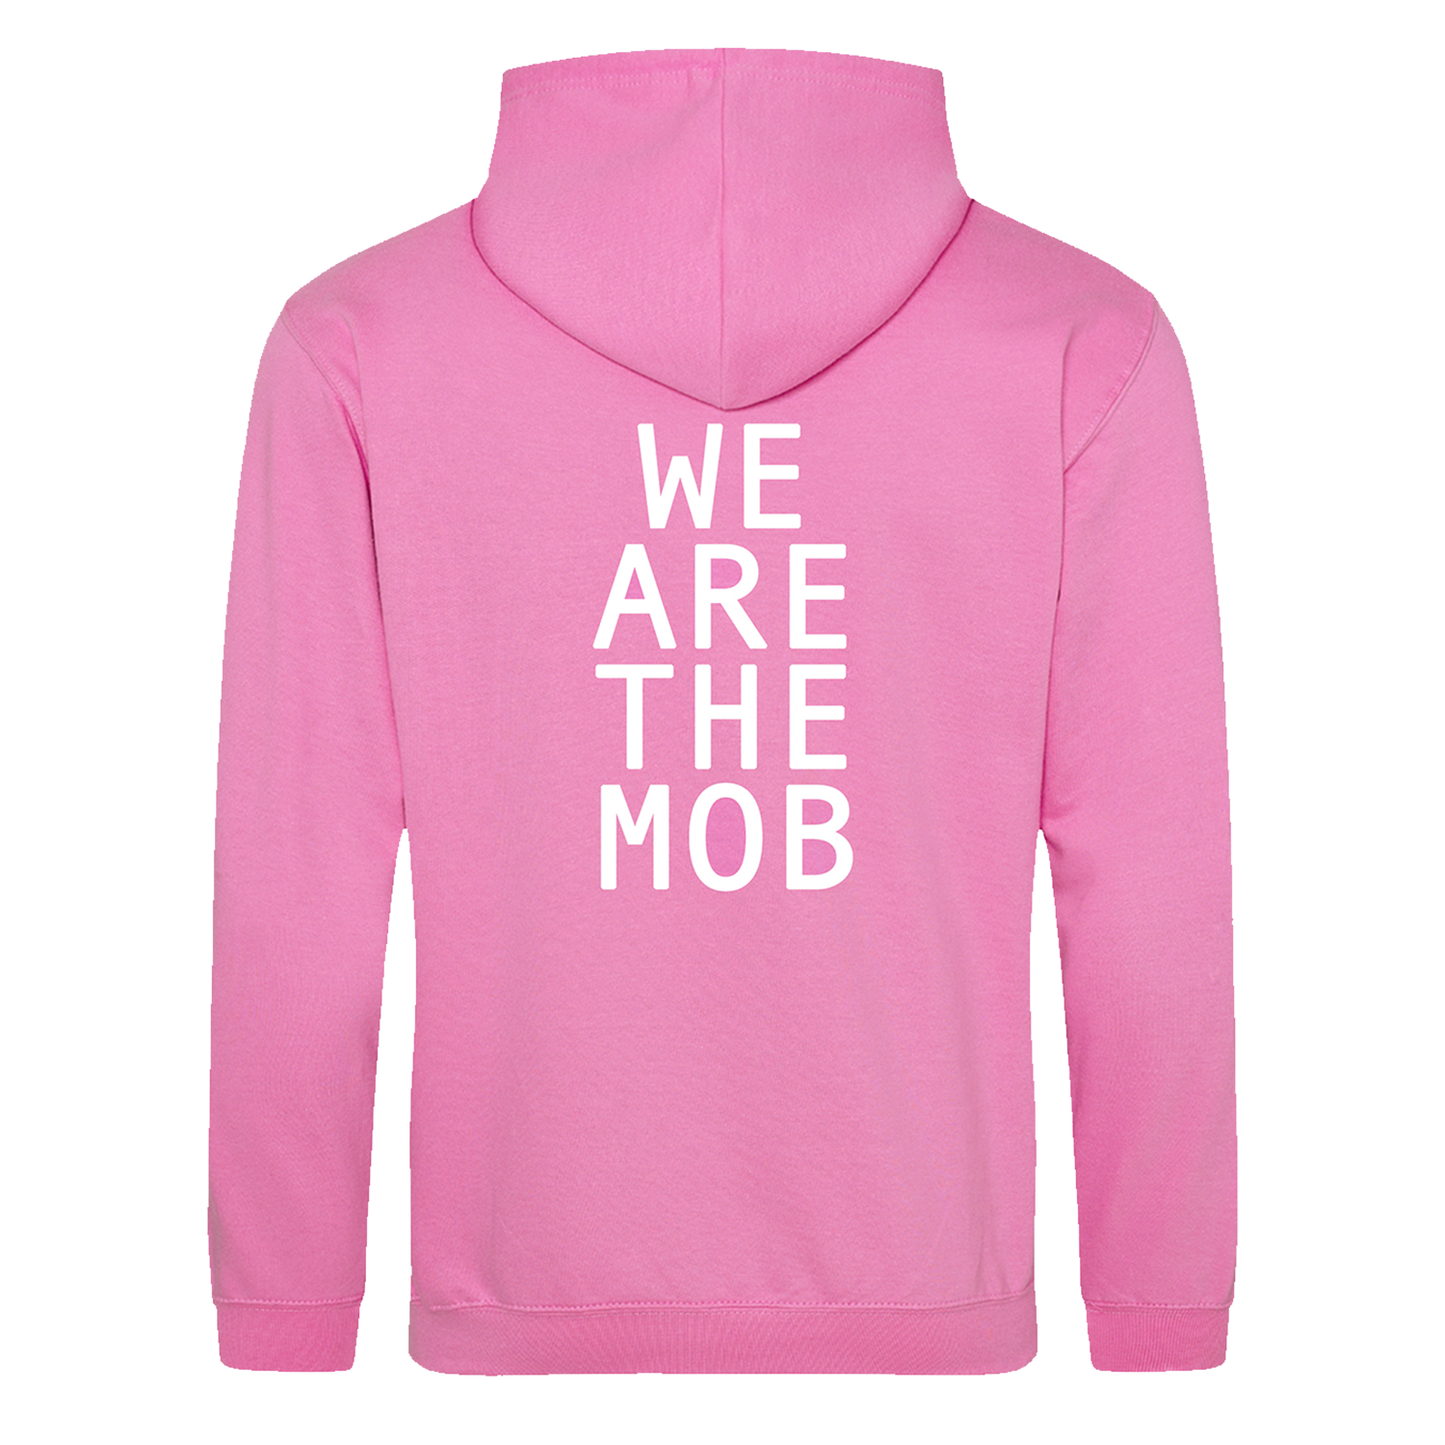 Penny Mob Official Hoodie